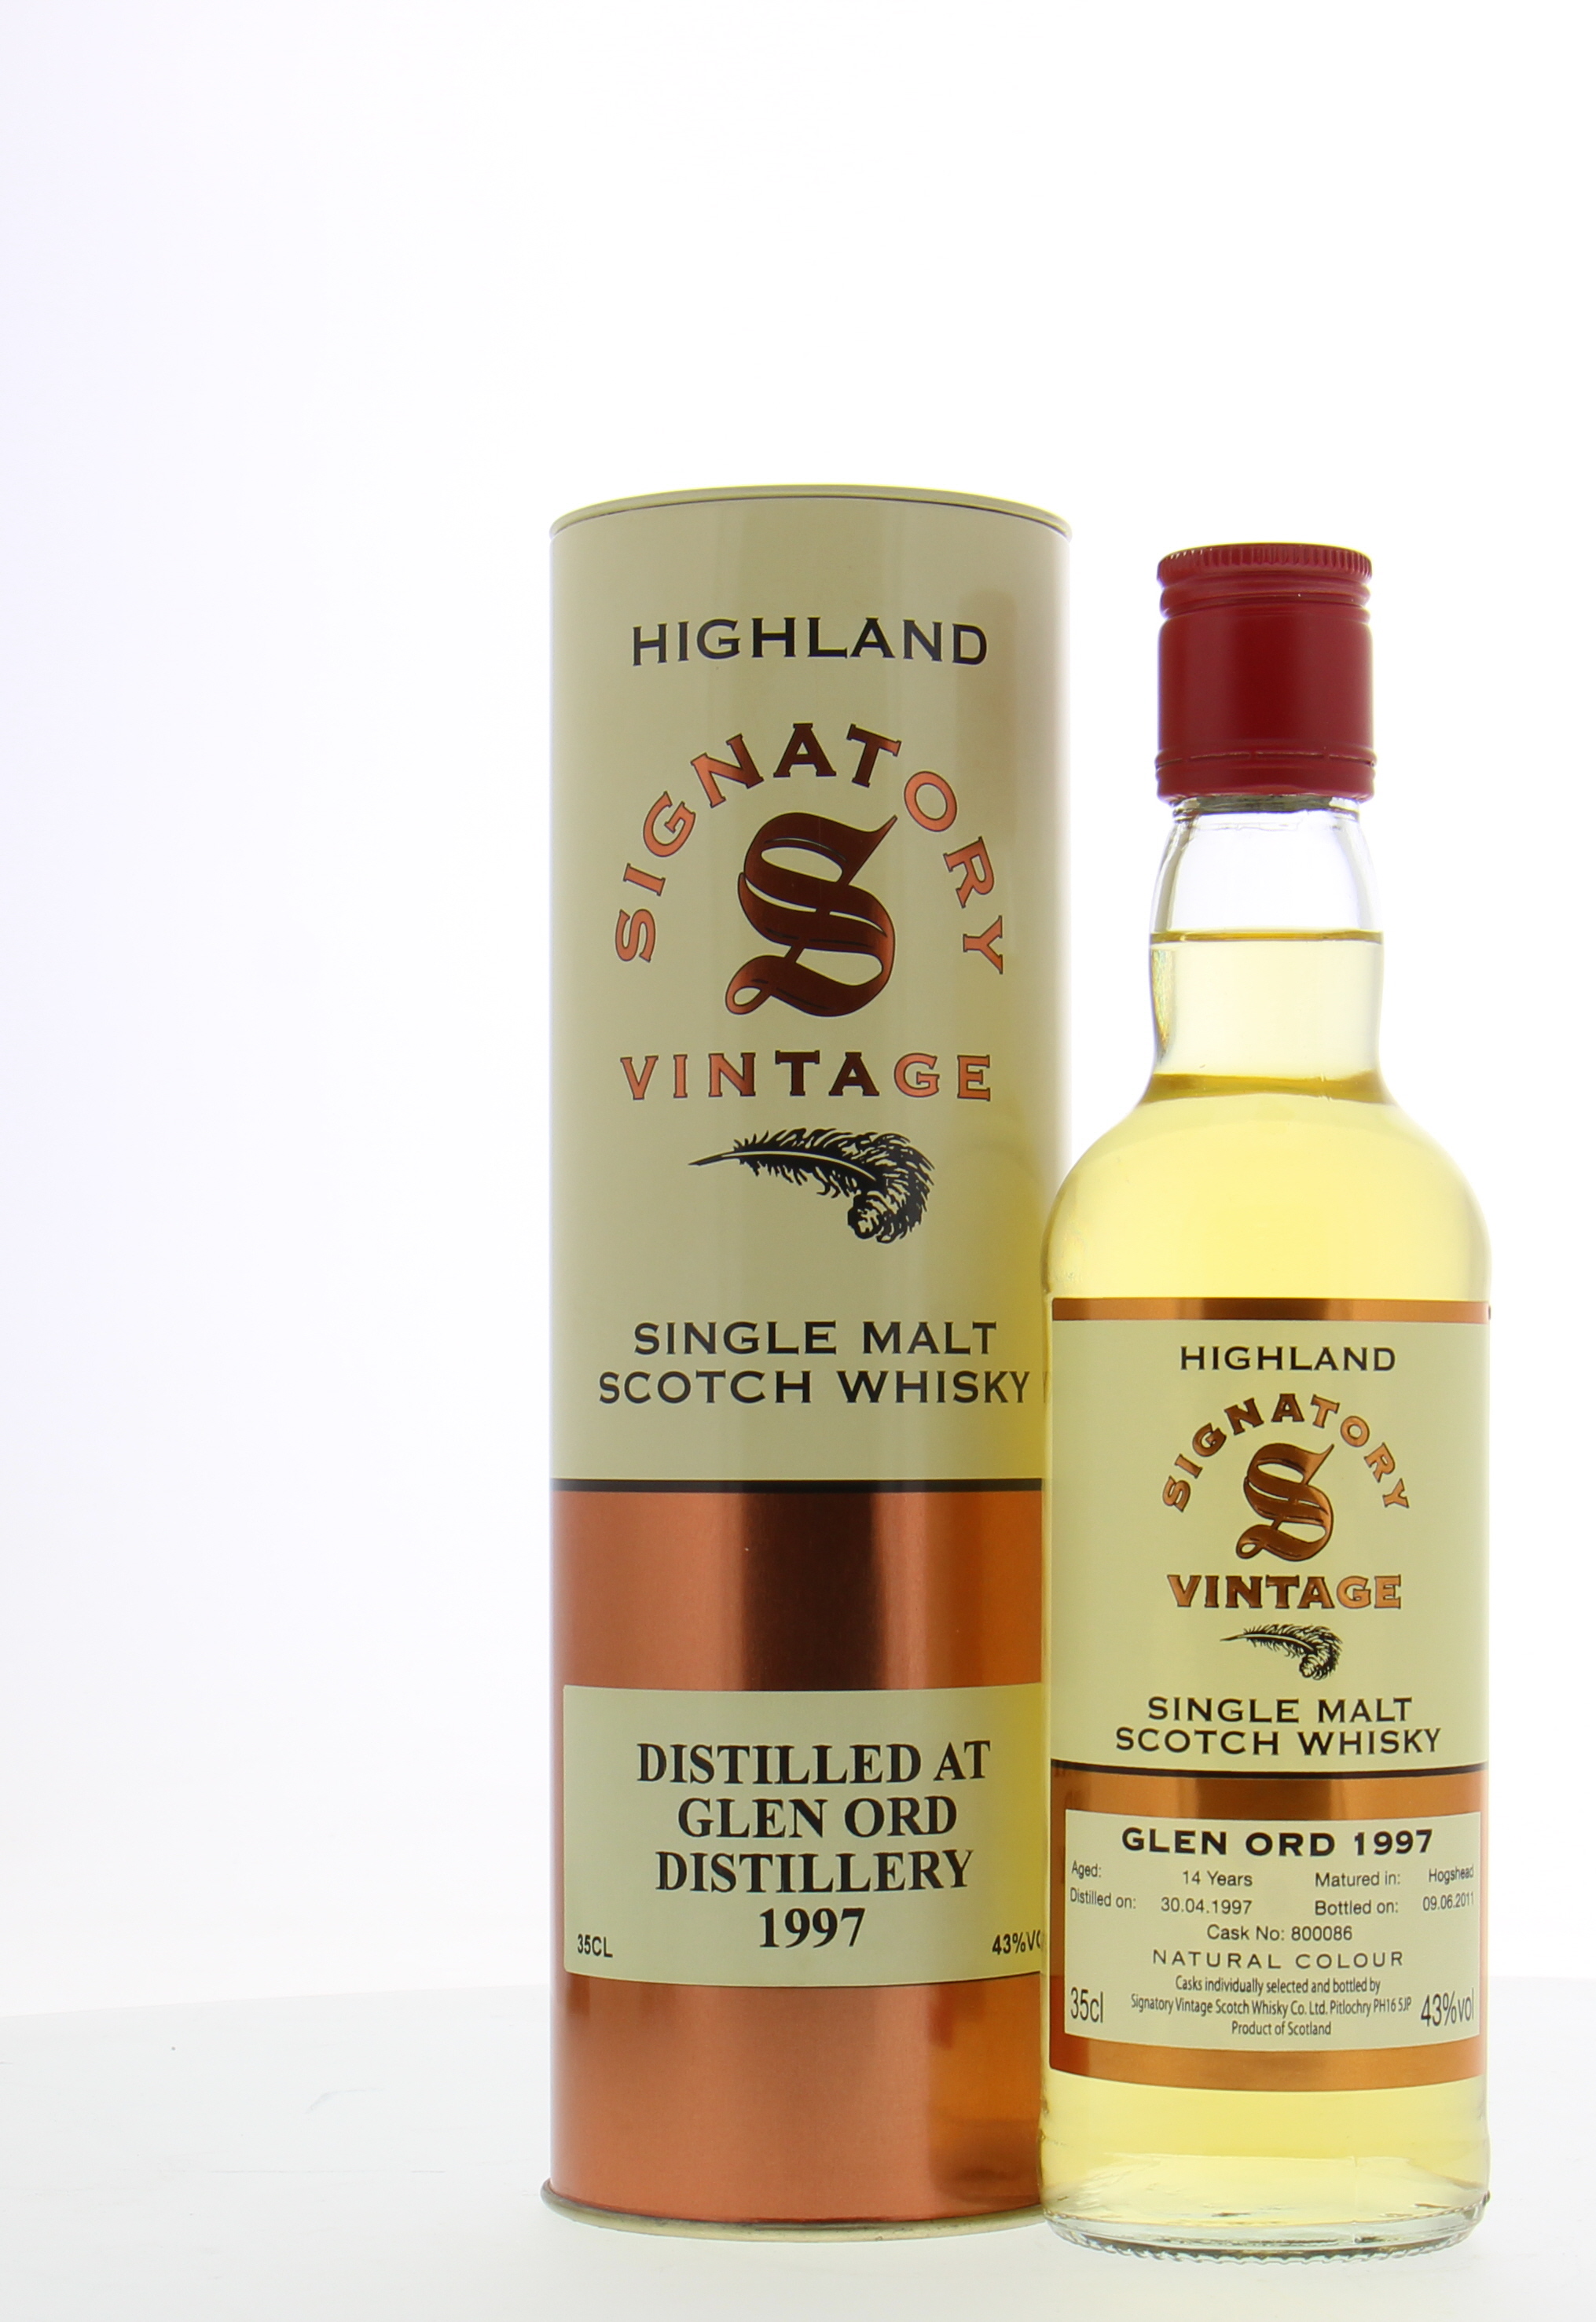 Glen Ord - 13 Years Old Signatory Vintage Cask 800086 43% 1997 In Original Container 10023